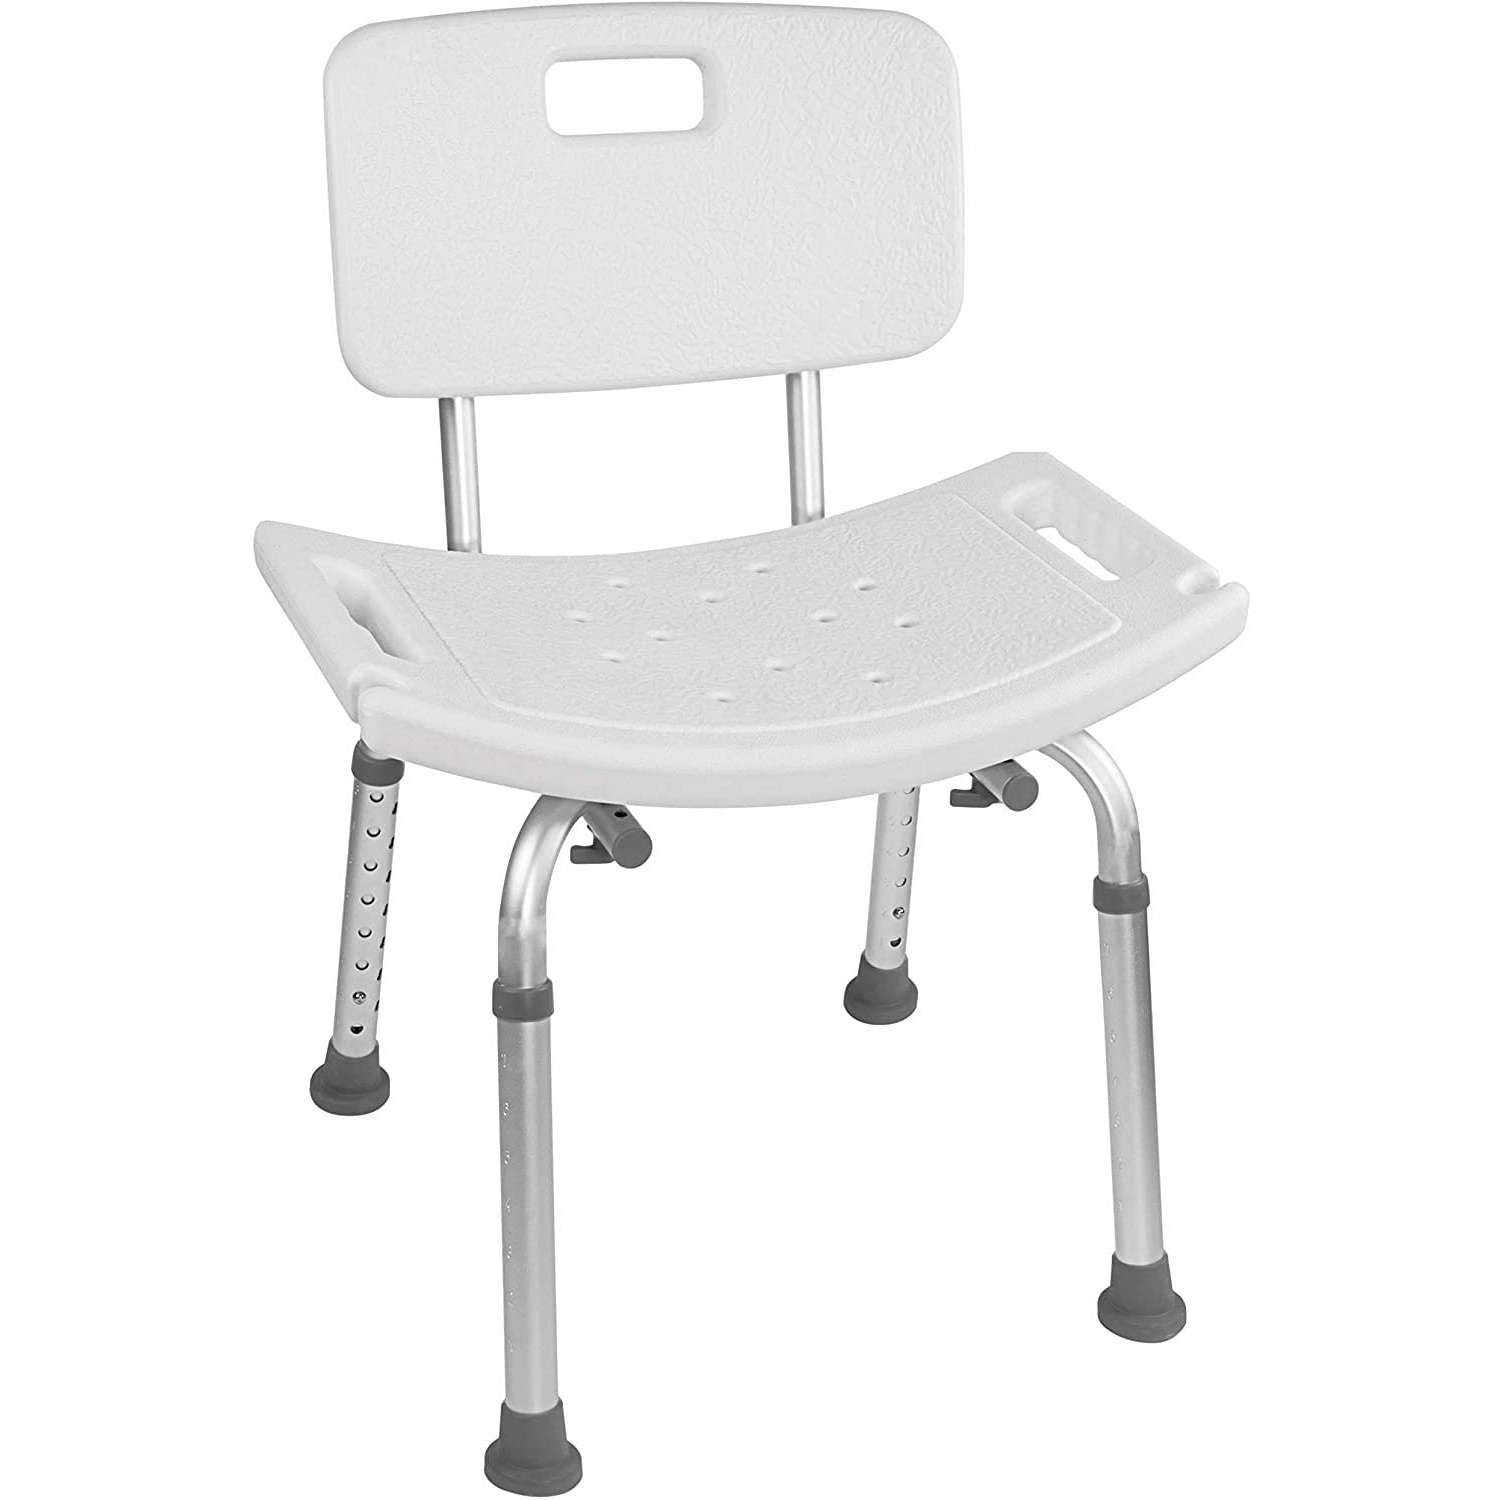 Vaunn Medical Shower Bench with Removable Back